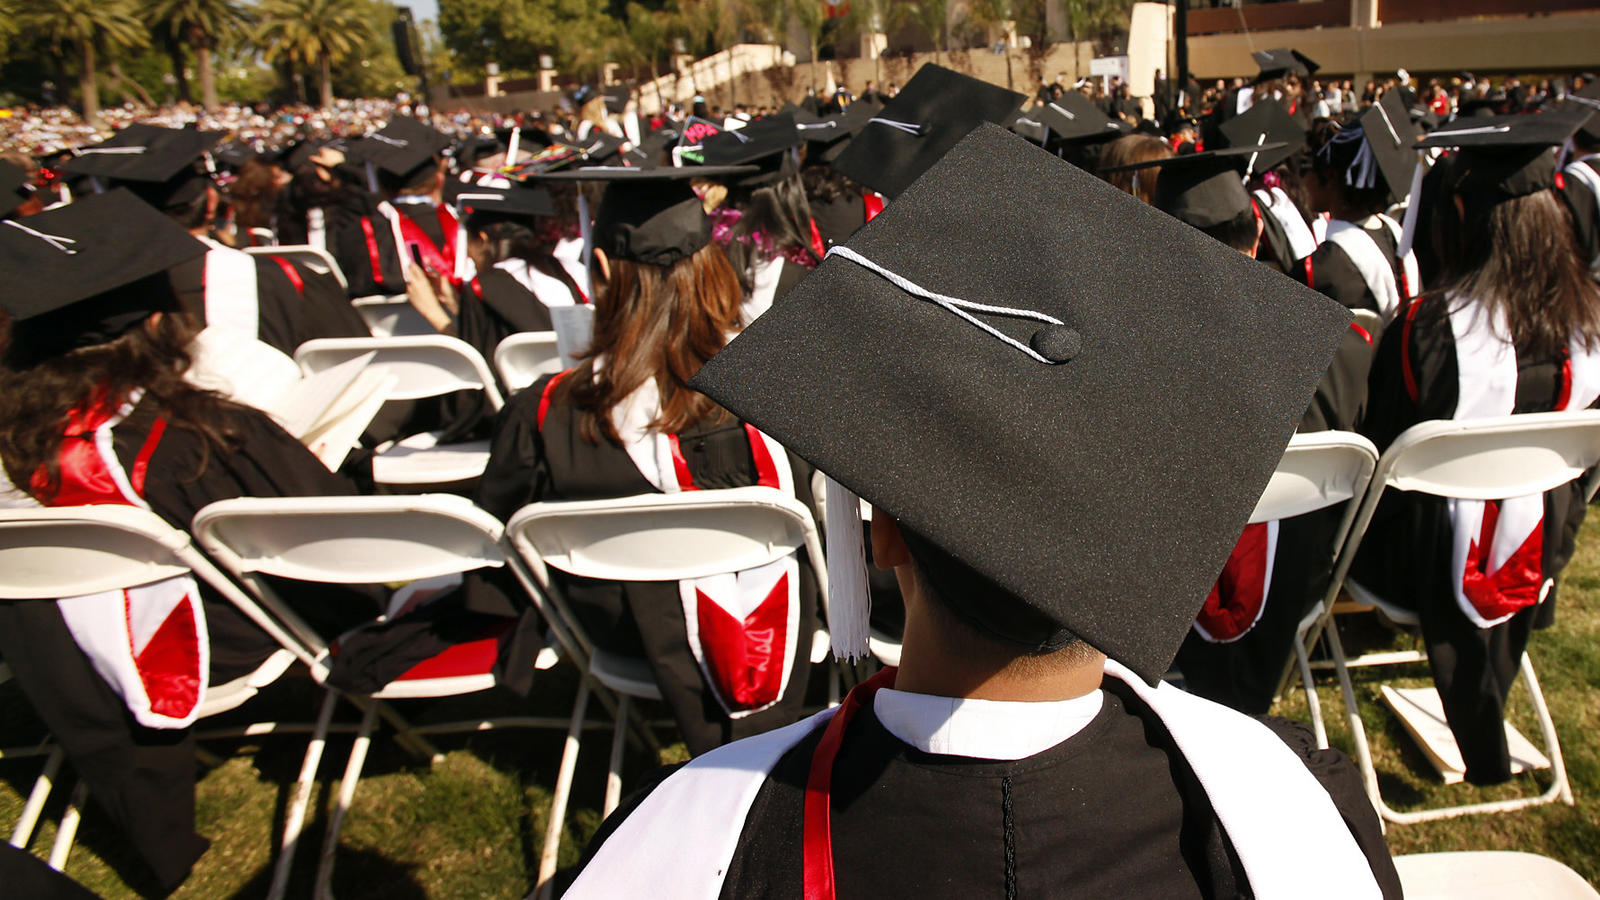 Commencement ceremonies at Cal State Northridge. (Al Seib / Los Angeles Times)